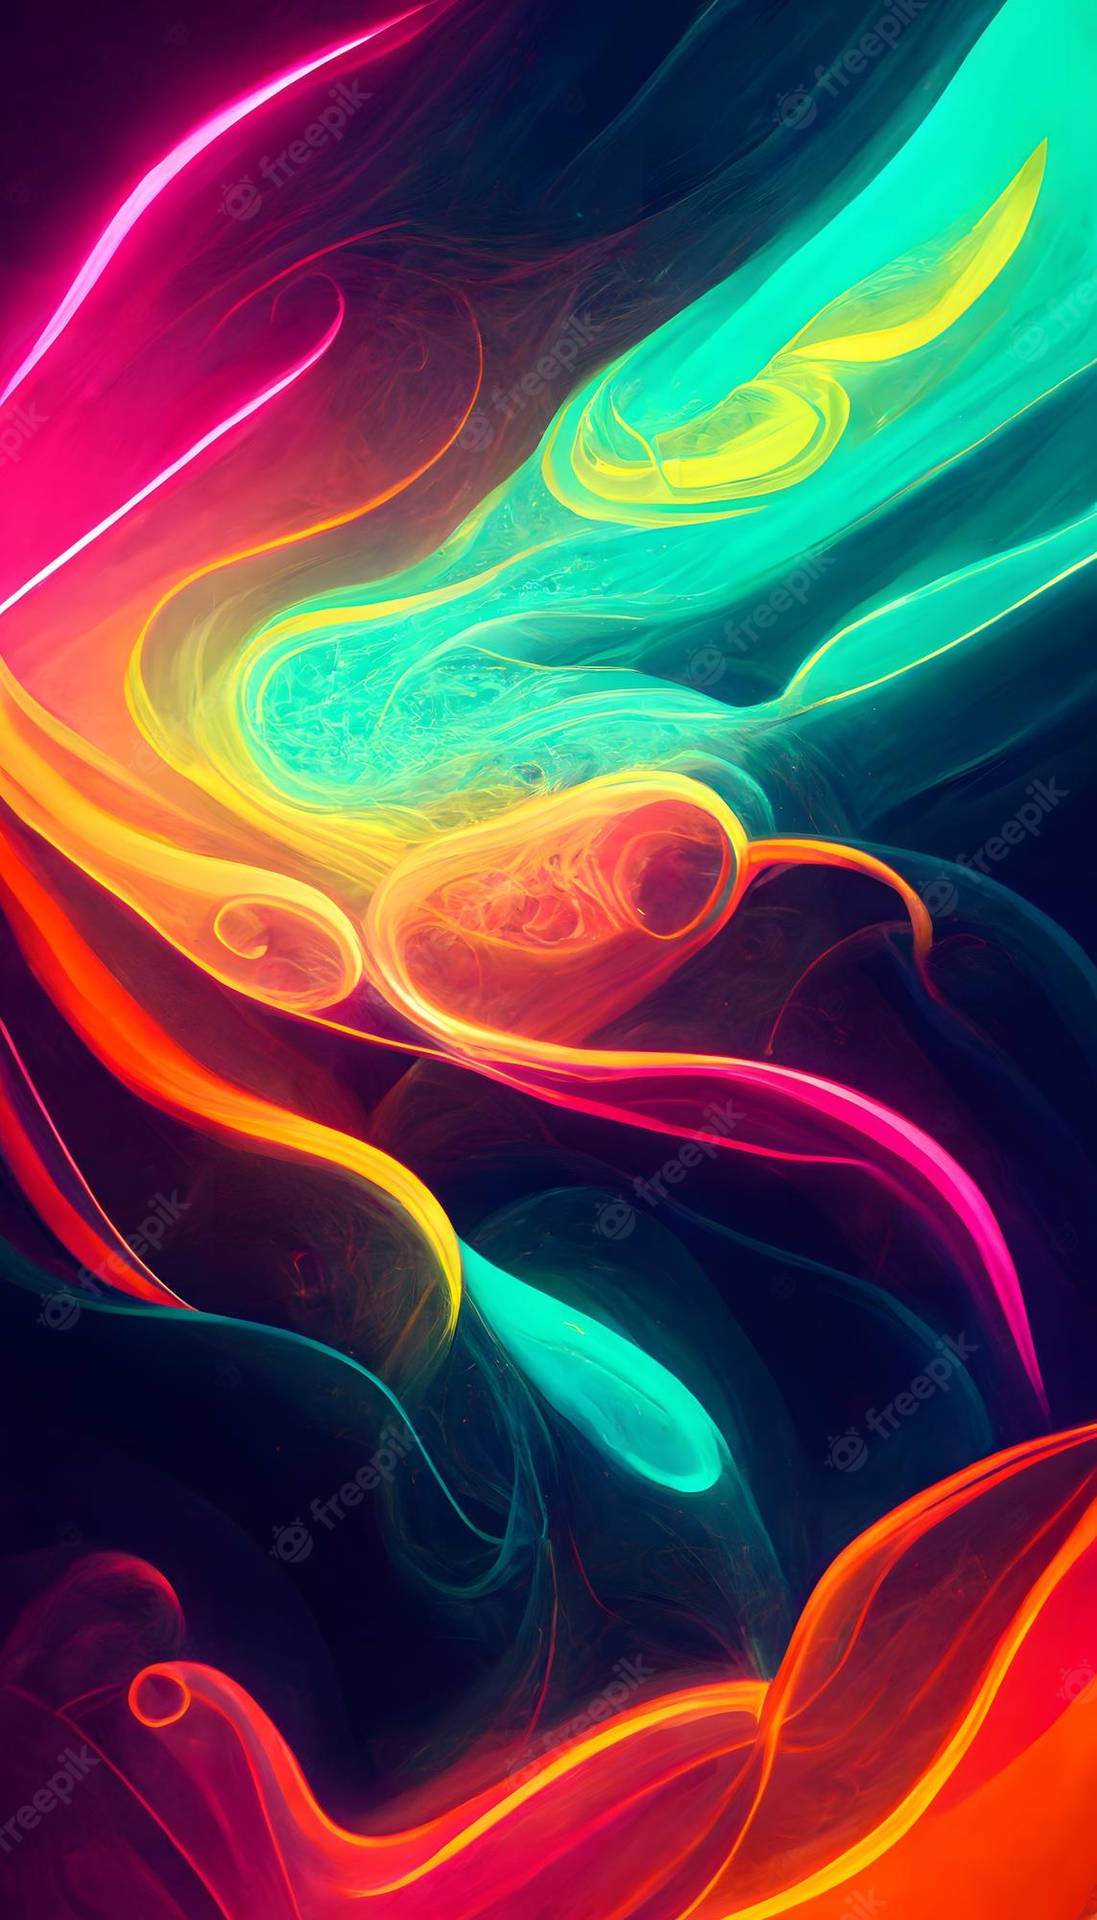 Enjoy the beauty of a Colorful Amoled Wallpaper